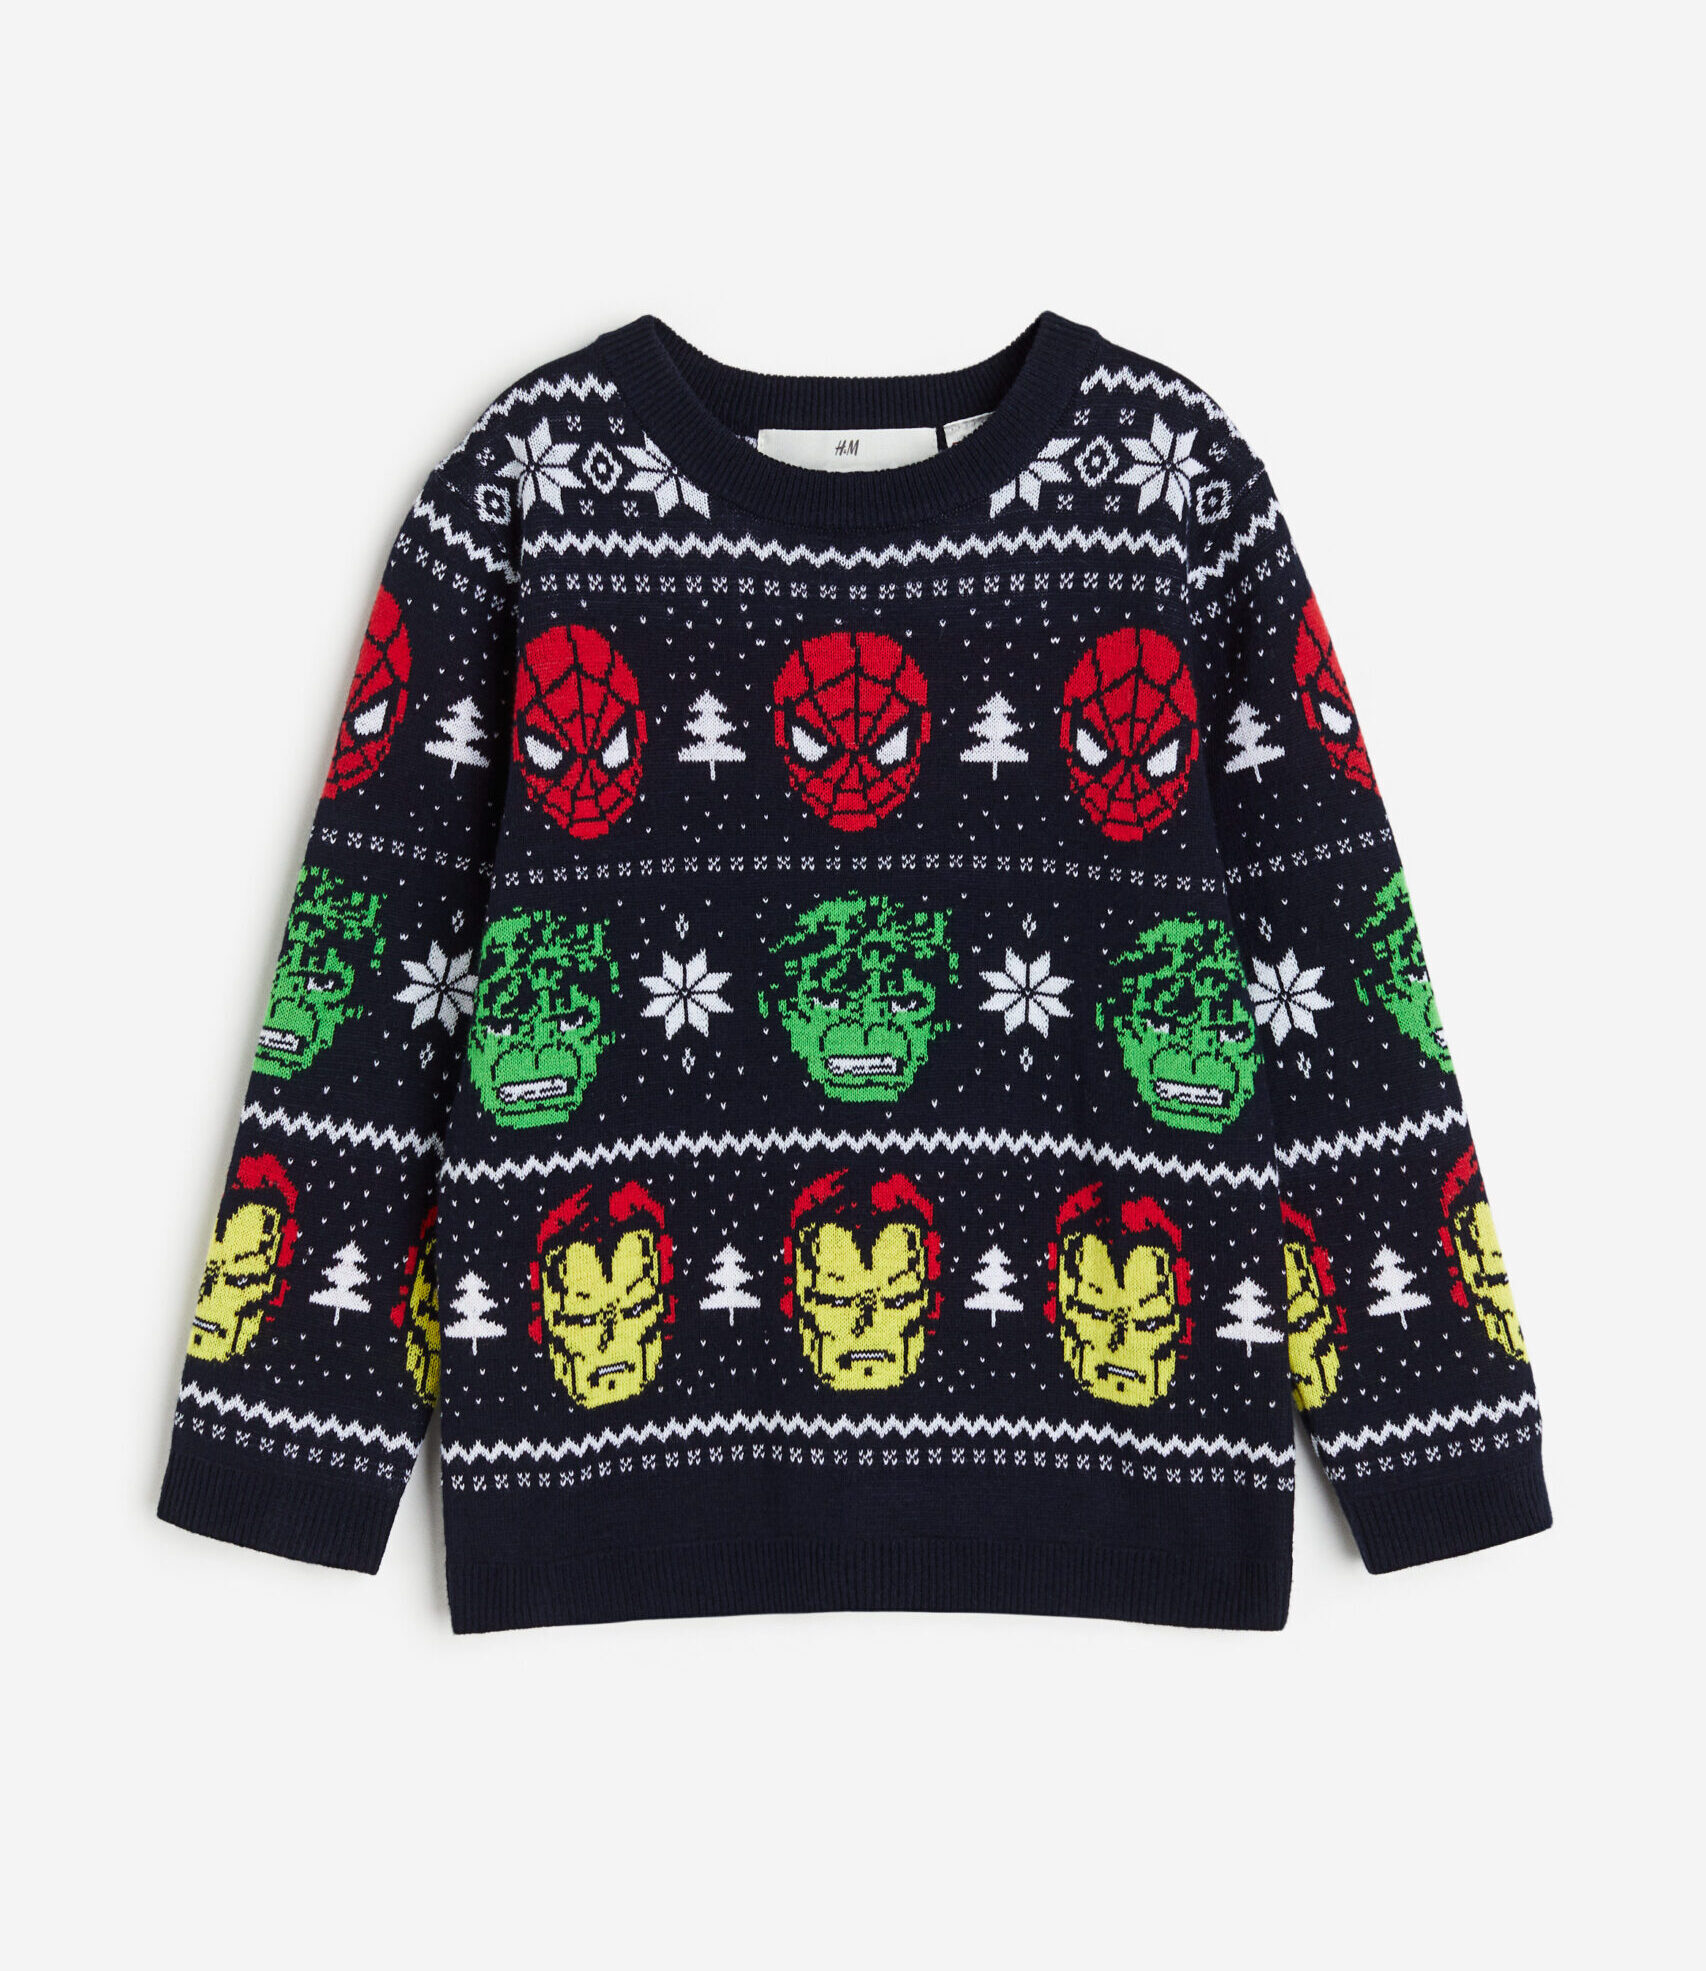 Child's black knit sweater with a superhero and Christmas themed pattern